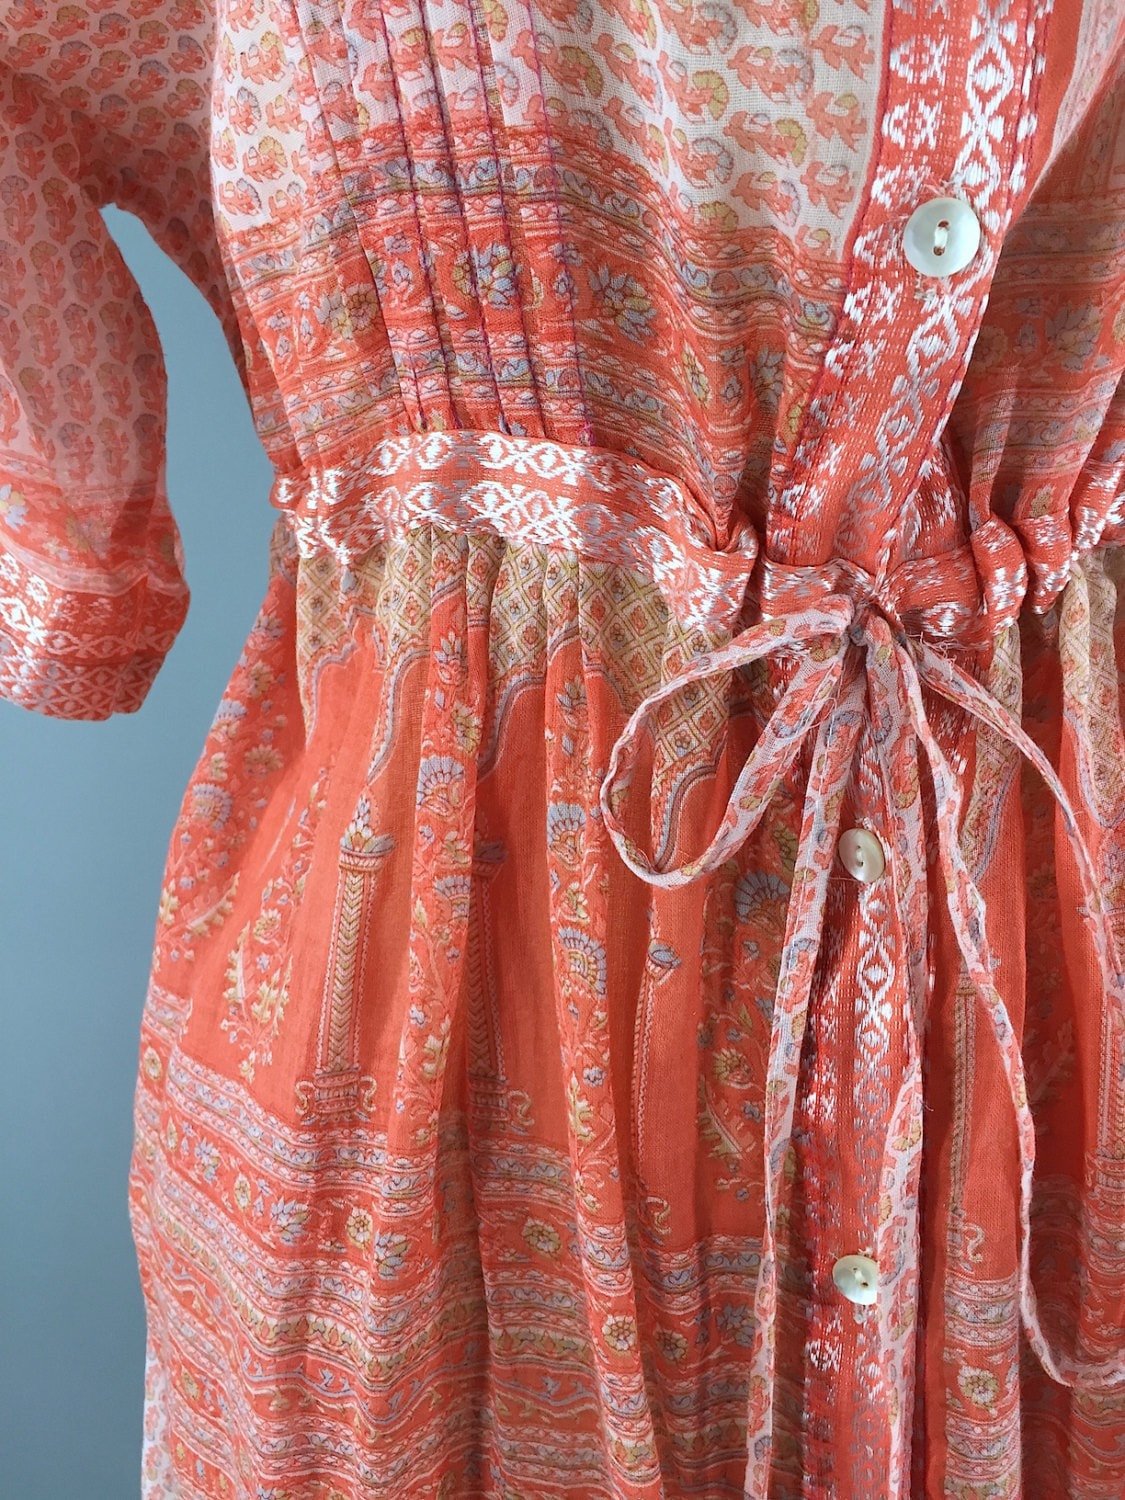 Peach Floral Print Indian Cotton Dress made from a Vintage Sari Dress